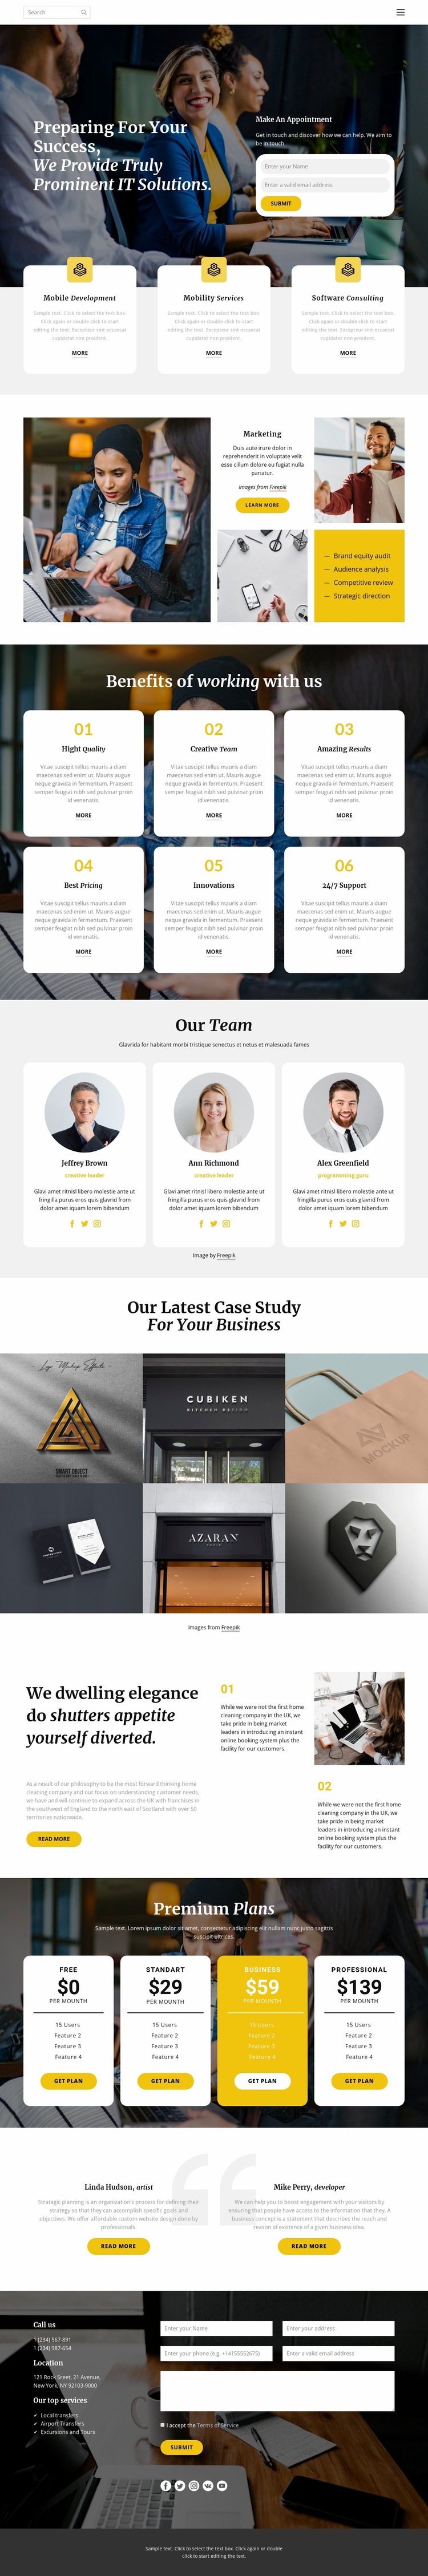 Joint-stock company Website Builder Templates